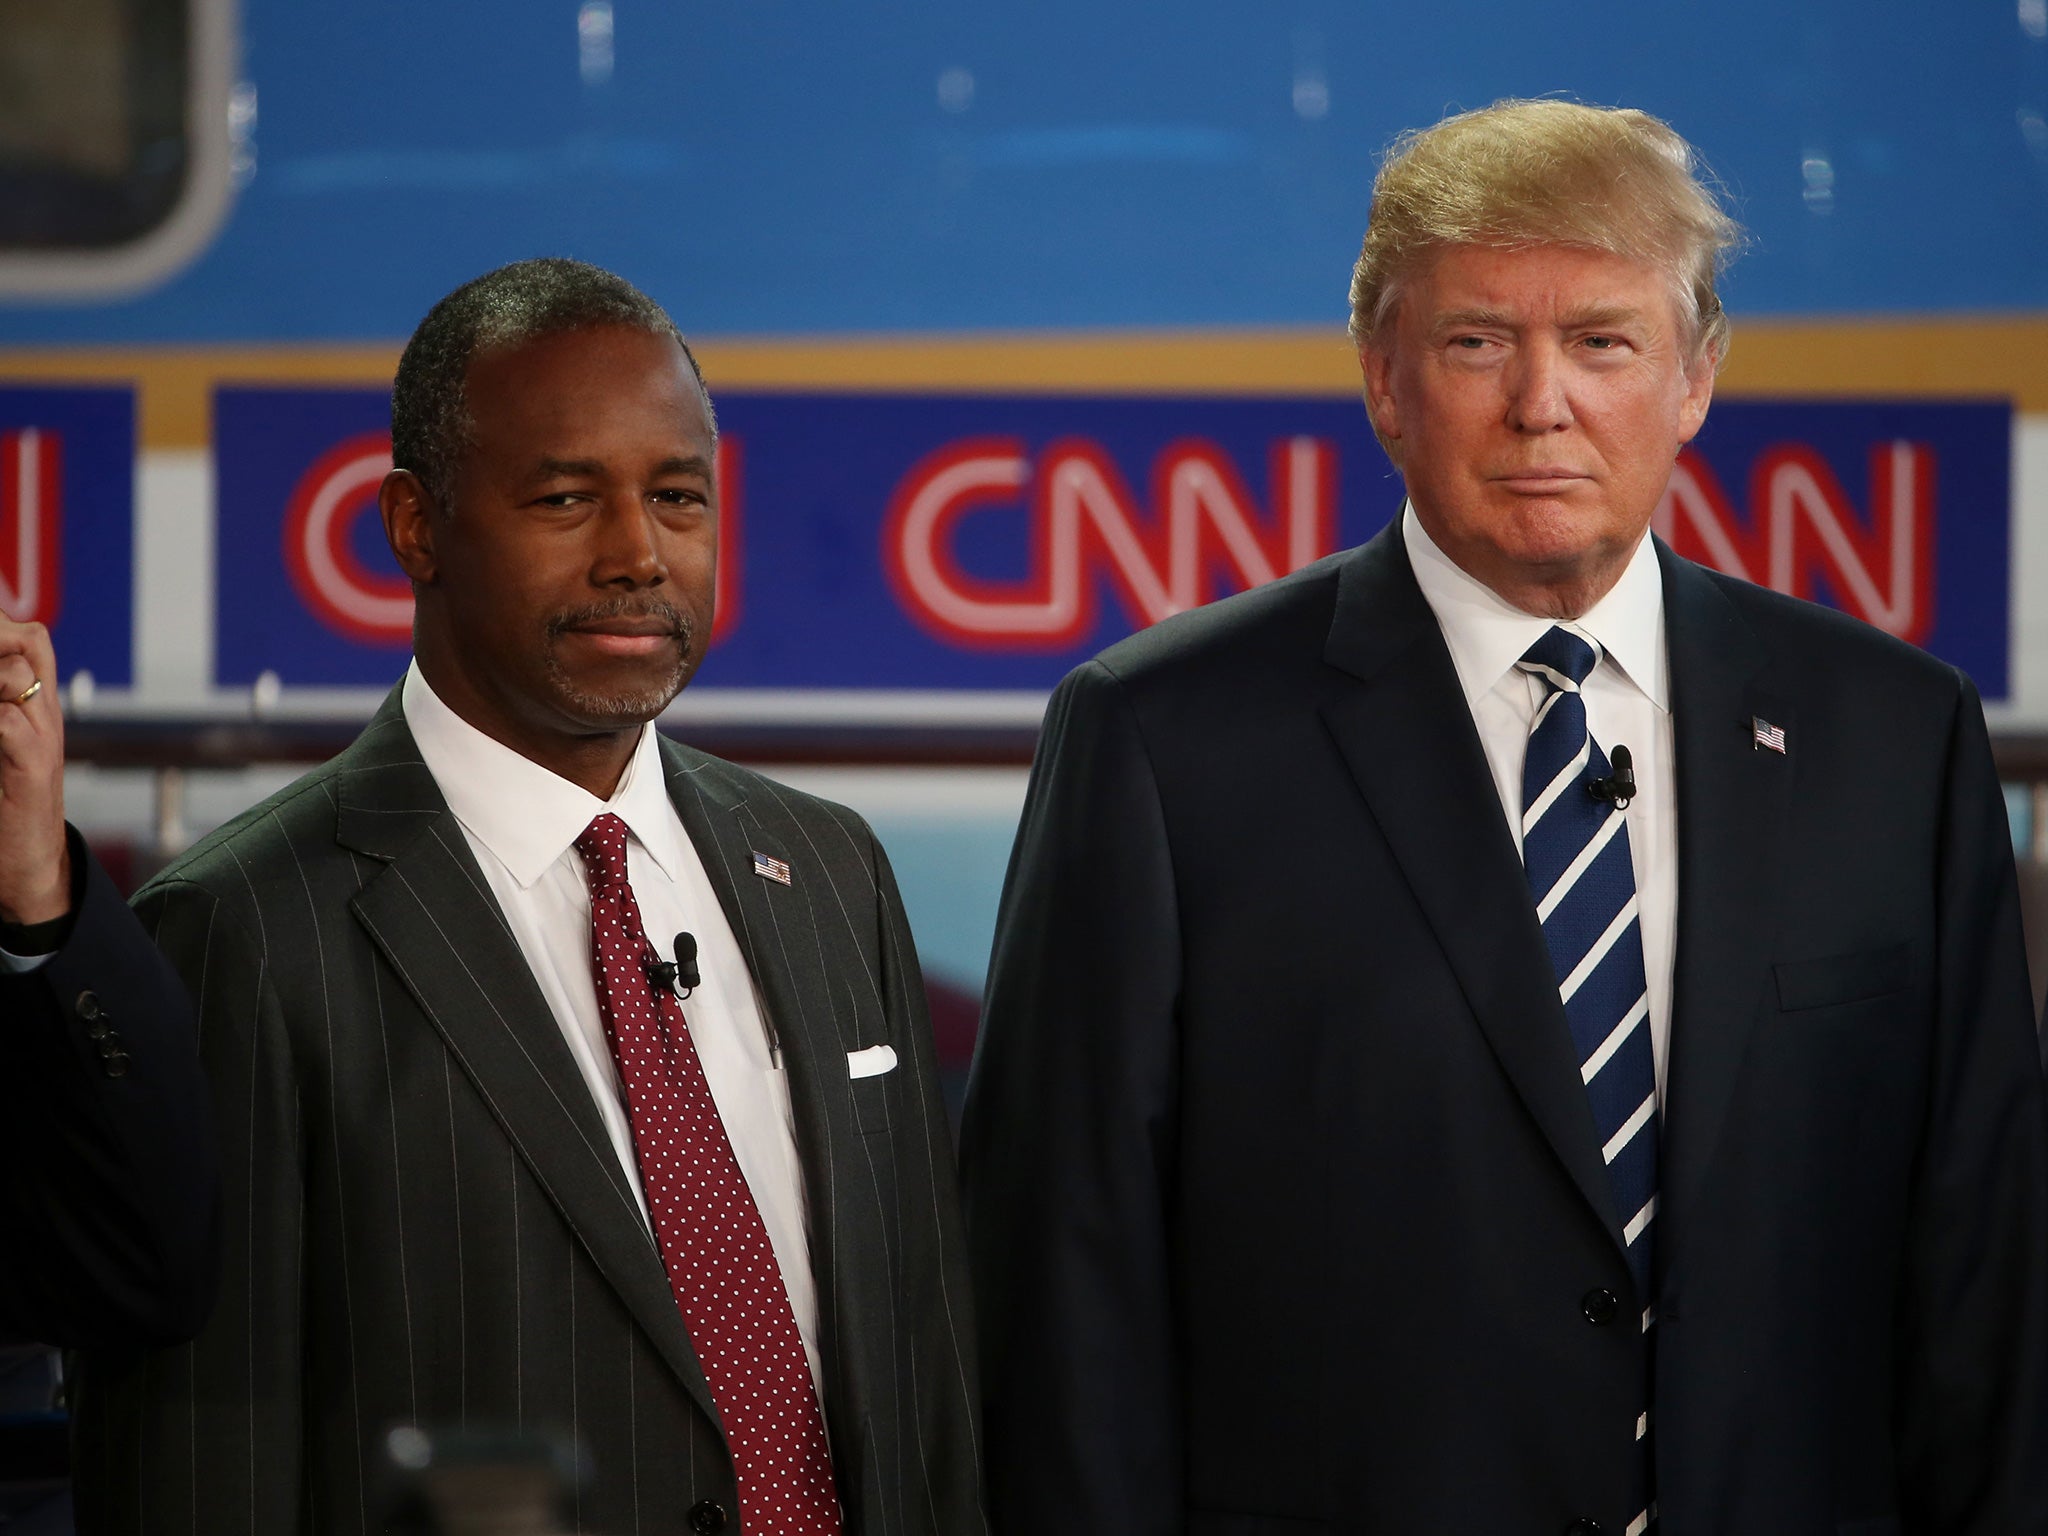 Ben Carson, left, and Donald Trump, lead the Republican race at 26 and 23 per cent respectively